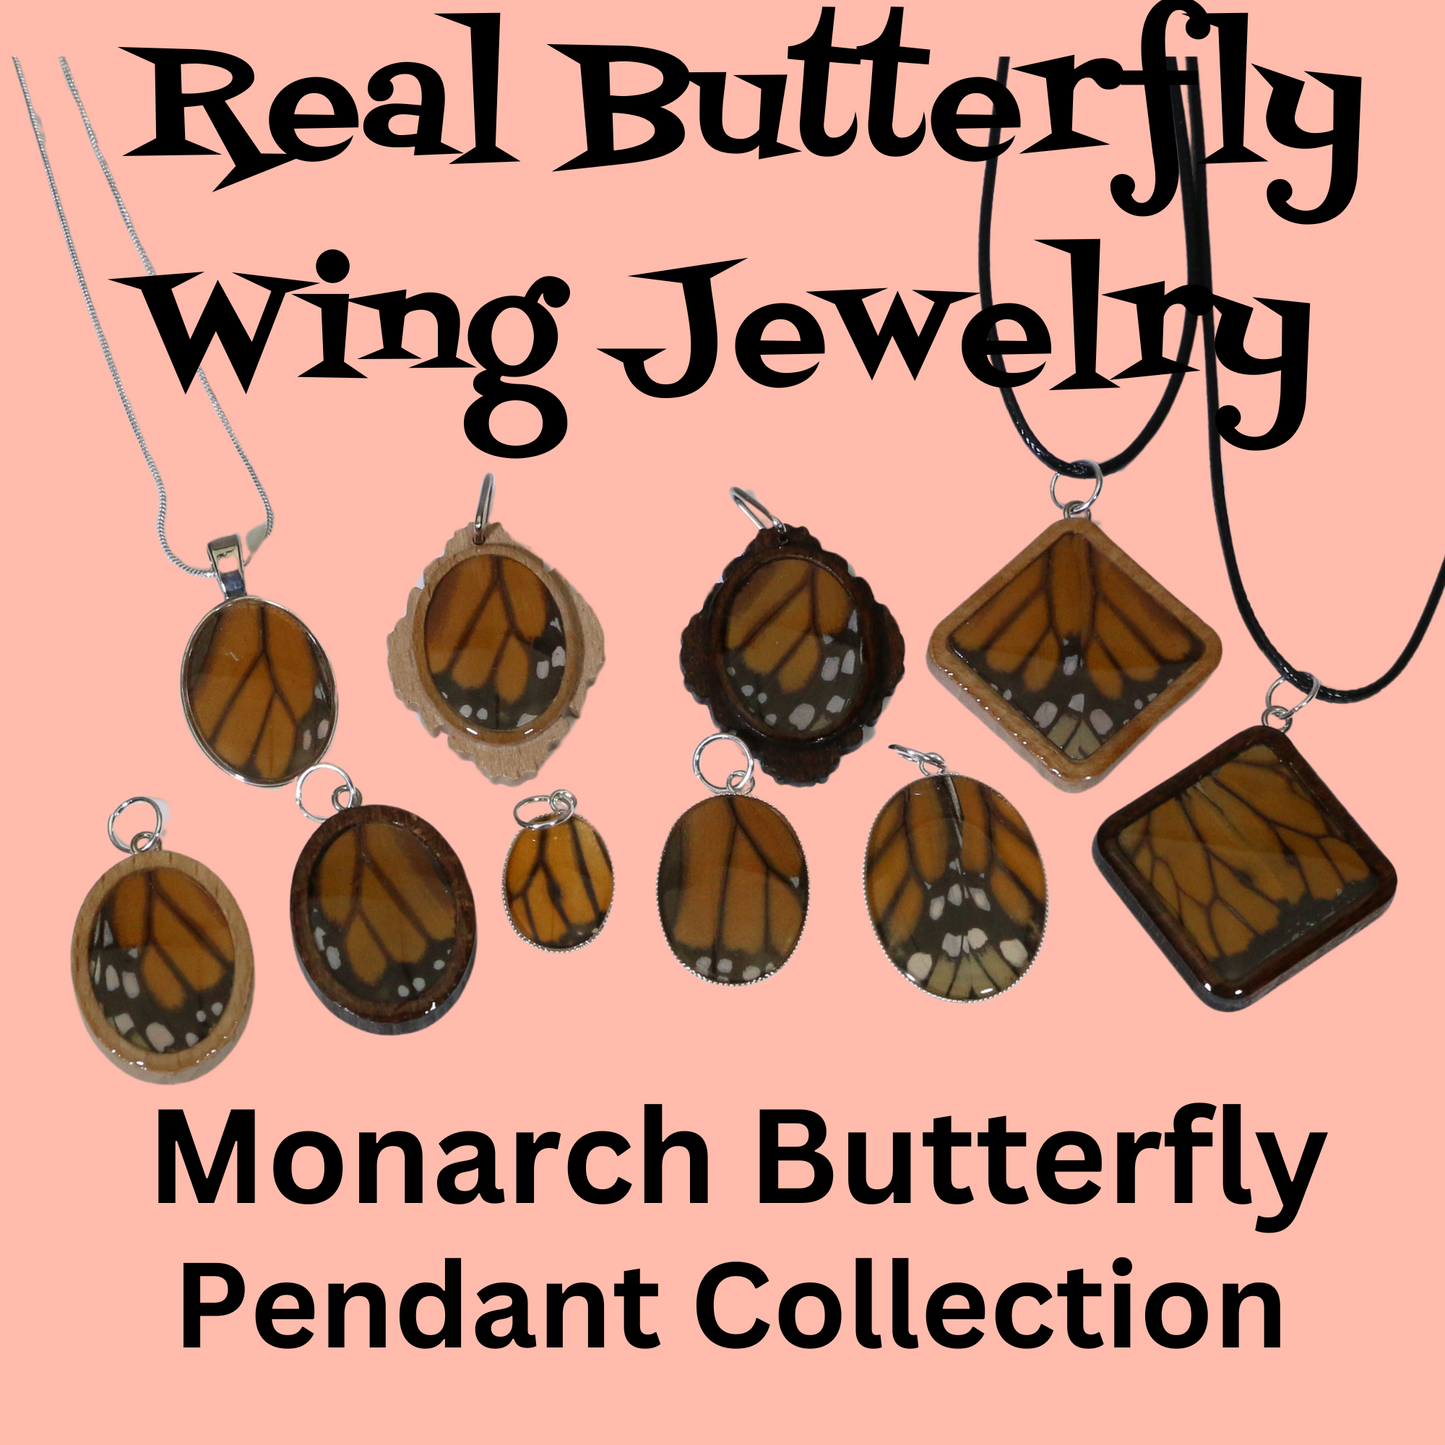 52004 - Real Butterfly Wing Jewelry - Pendant Collection - Monarch Butterfly